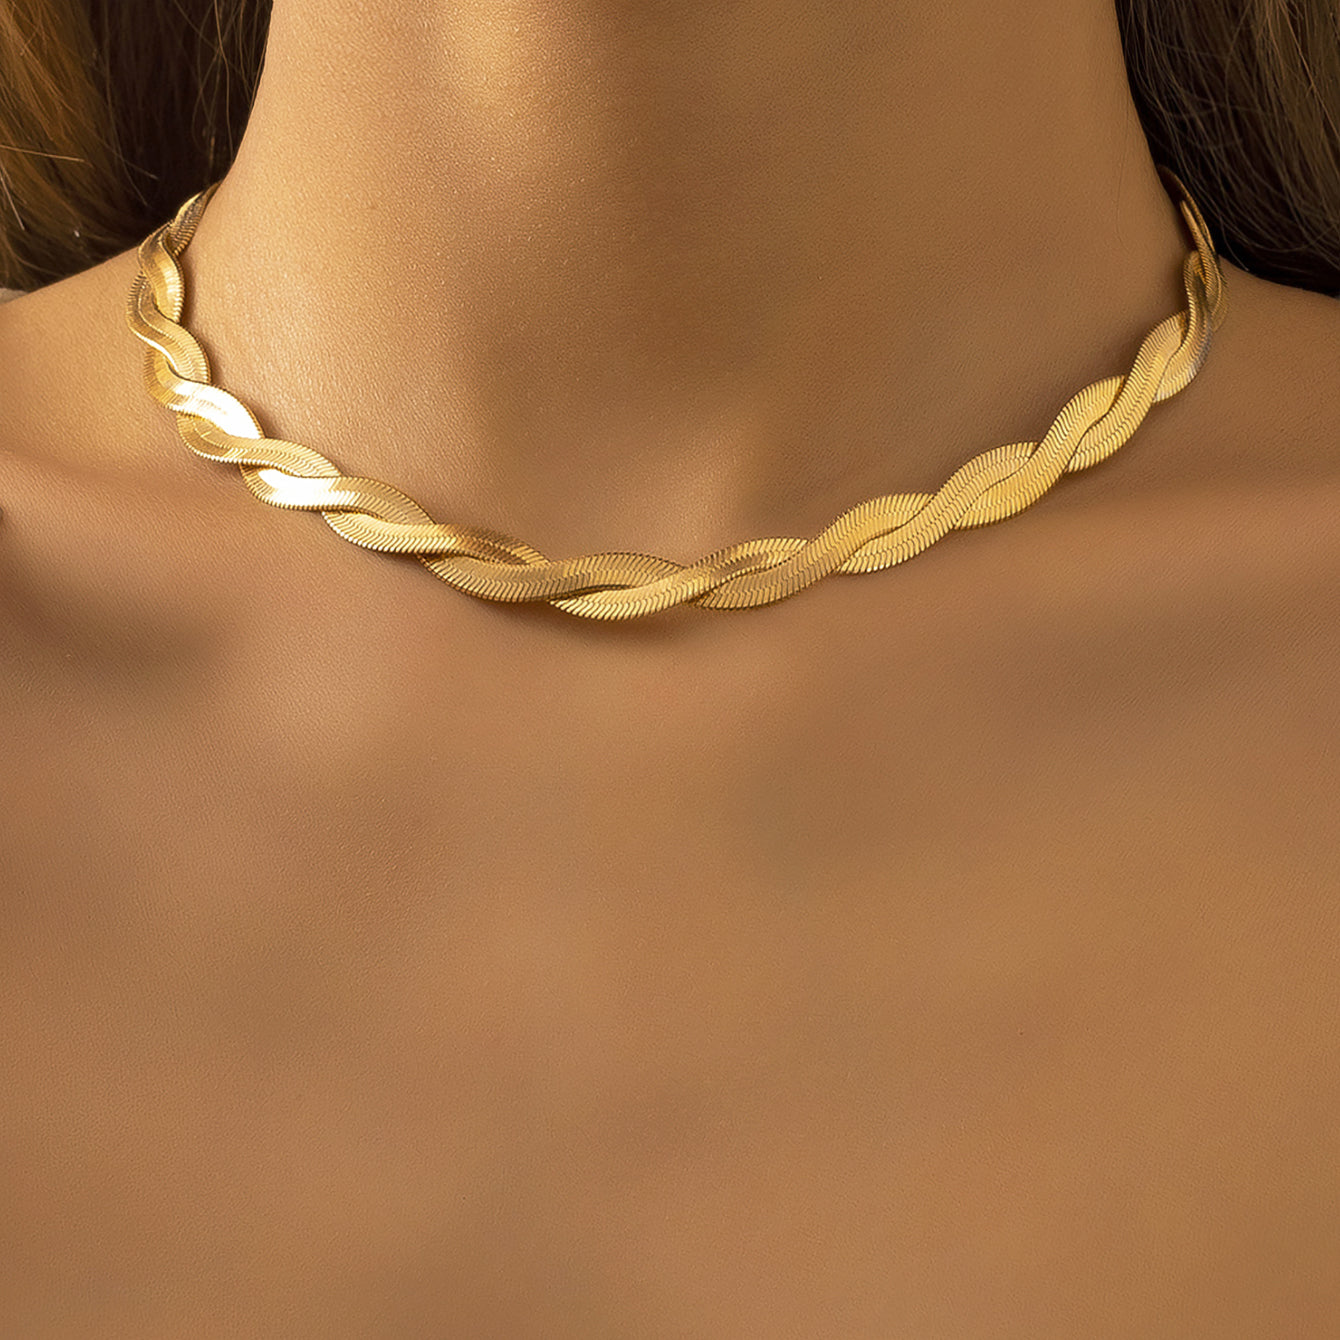 Elegant and Stylish: 1 Piece Braided Chain Necklace - Perfect for Any Occasion!